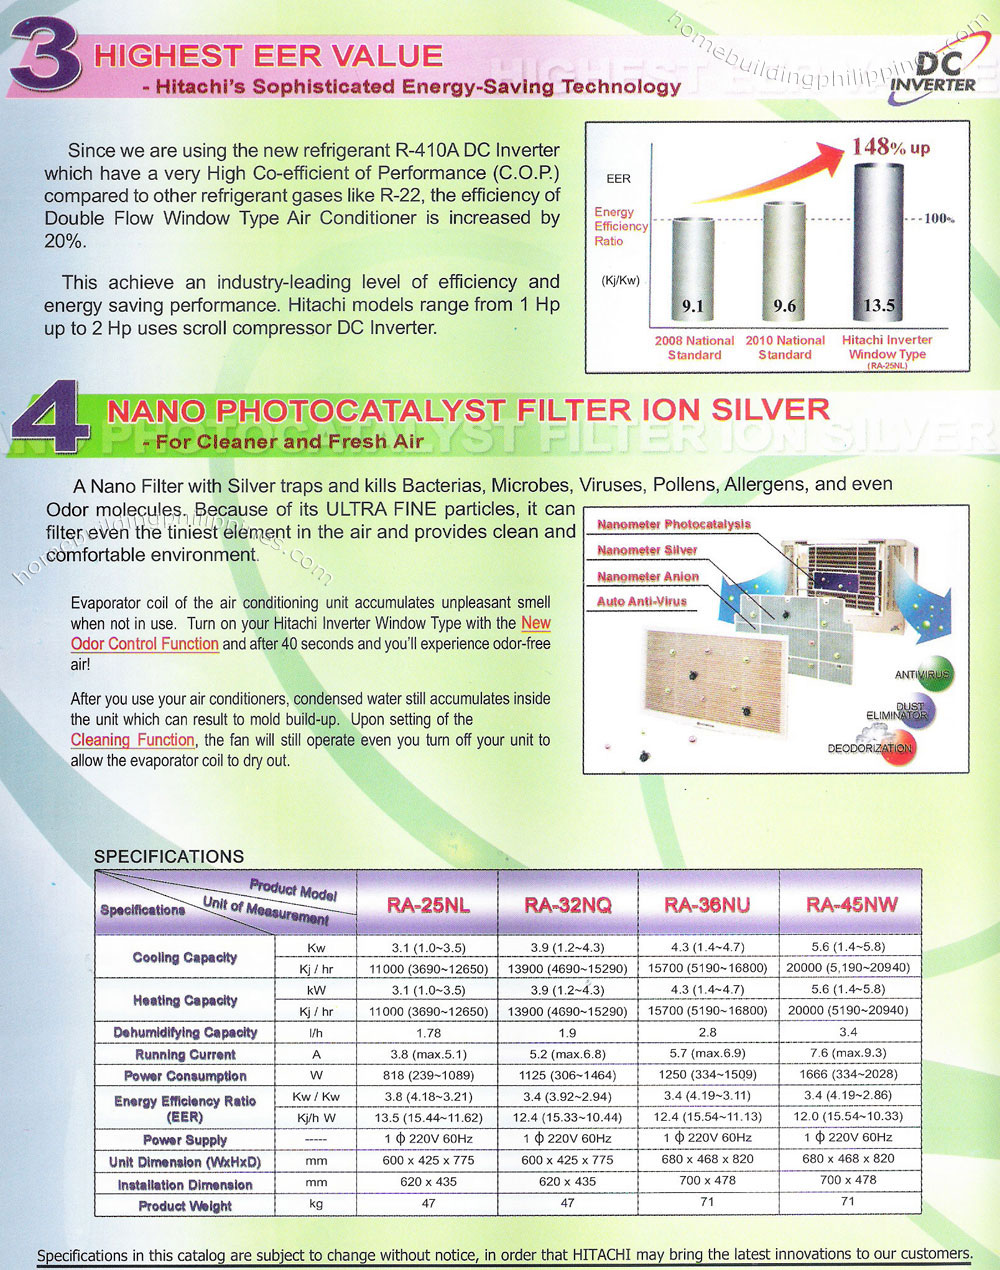 air conditioner highest energy efficiency ratio value nano photocatalyst filter ion silver